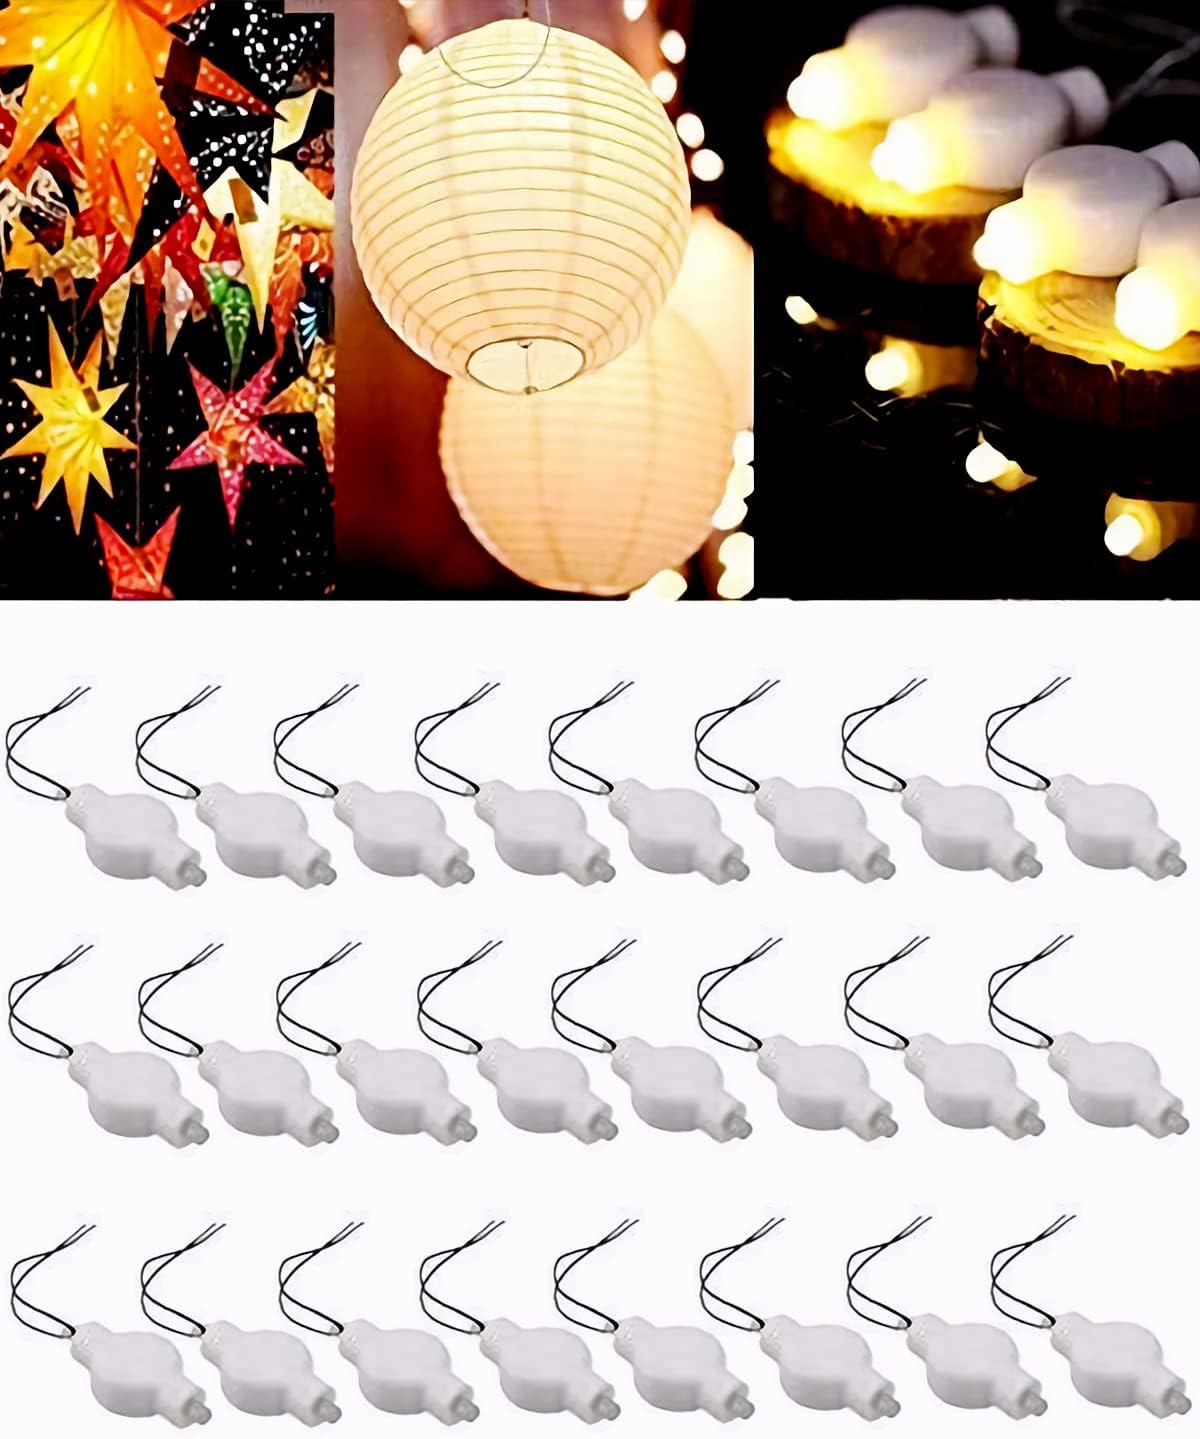 EVERSPREAD US INC LOGUIDE LED Lantern Lights, 24 Pack Battery Powered Small LED Lights for Paper Lanterns,Balloons,Floral,Weddings